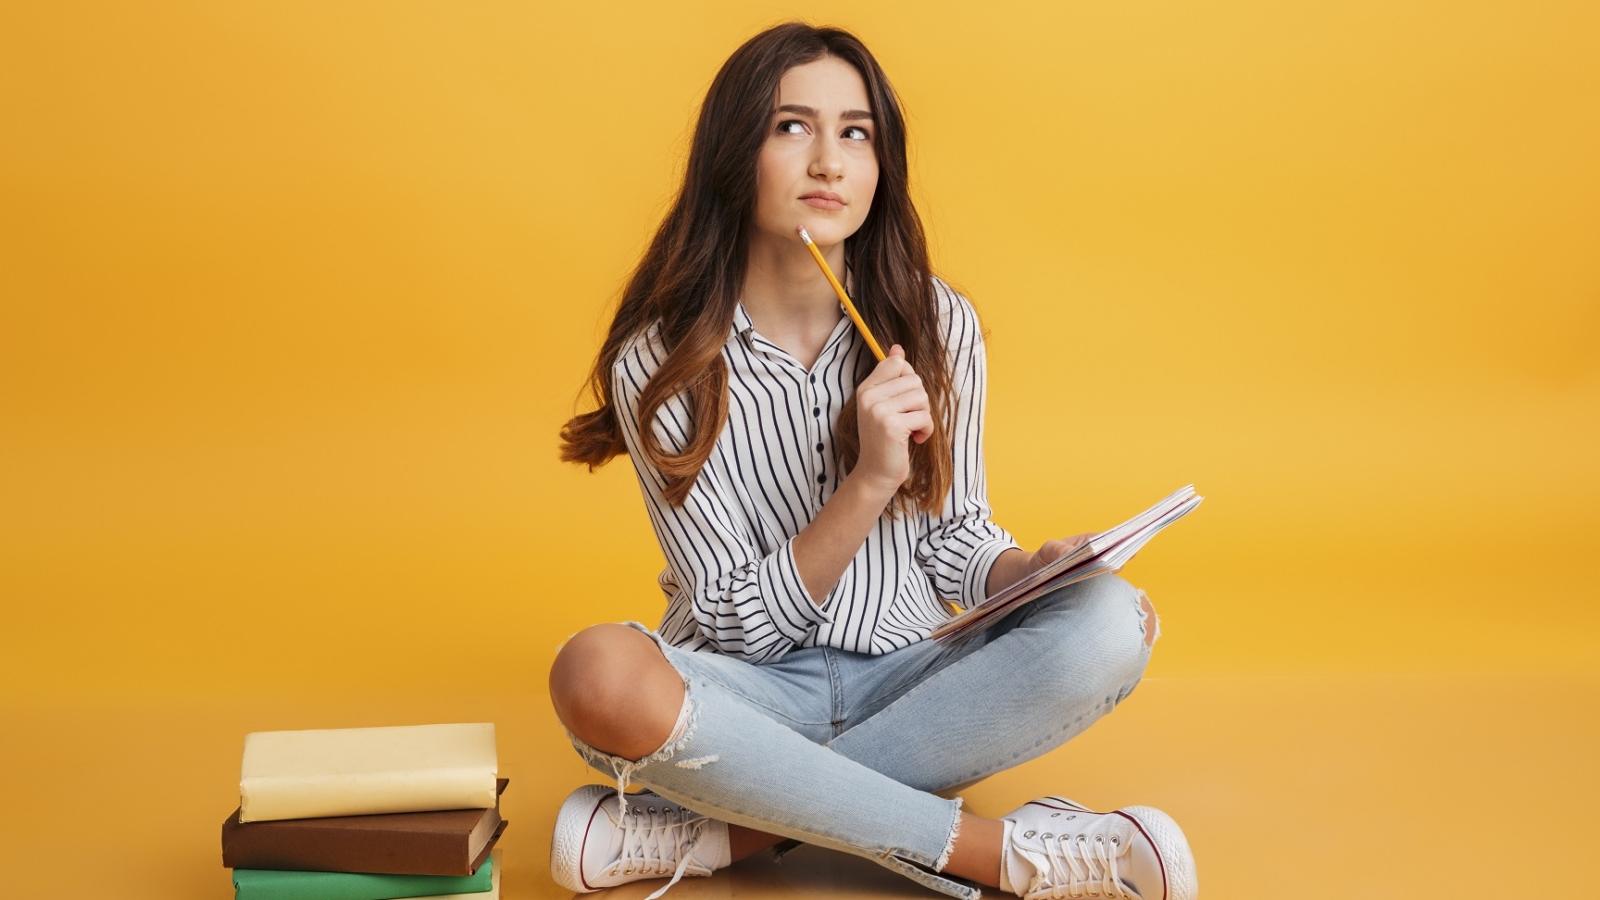 Portrait of a pensive young girl making notes while sitting with books isolated over yellow background